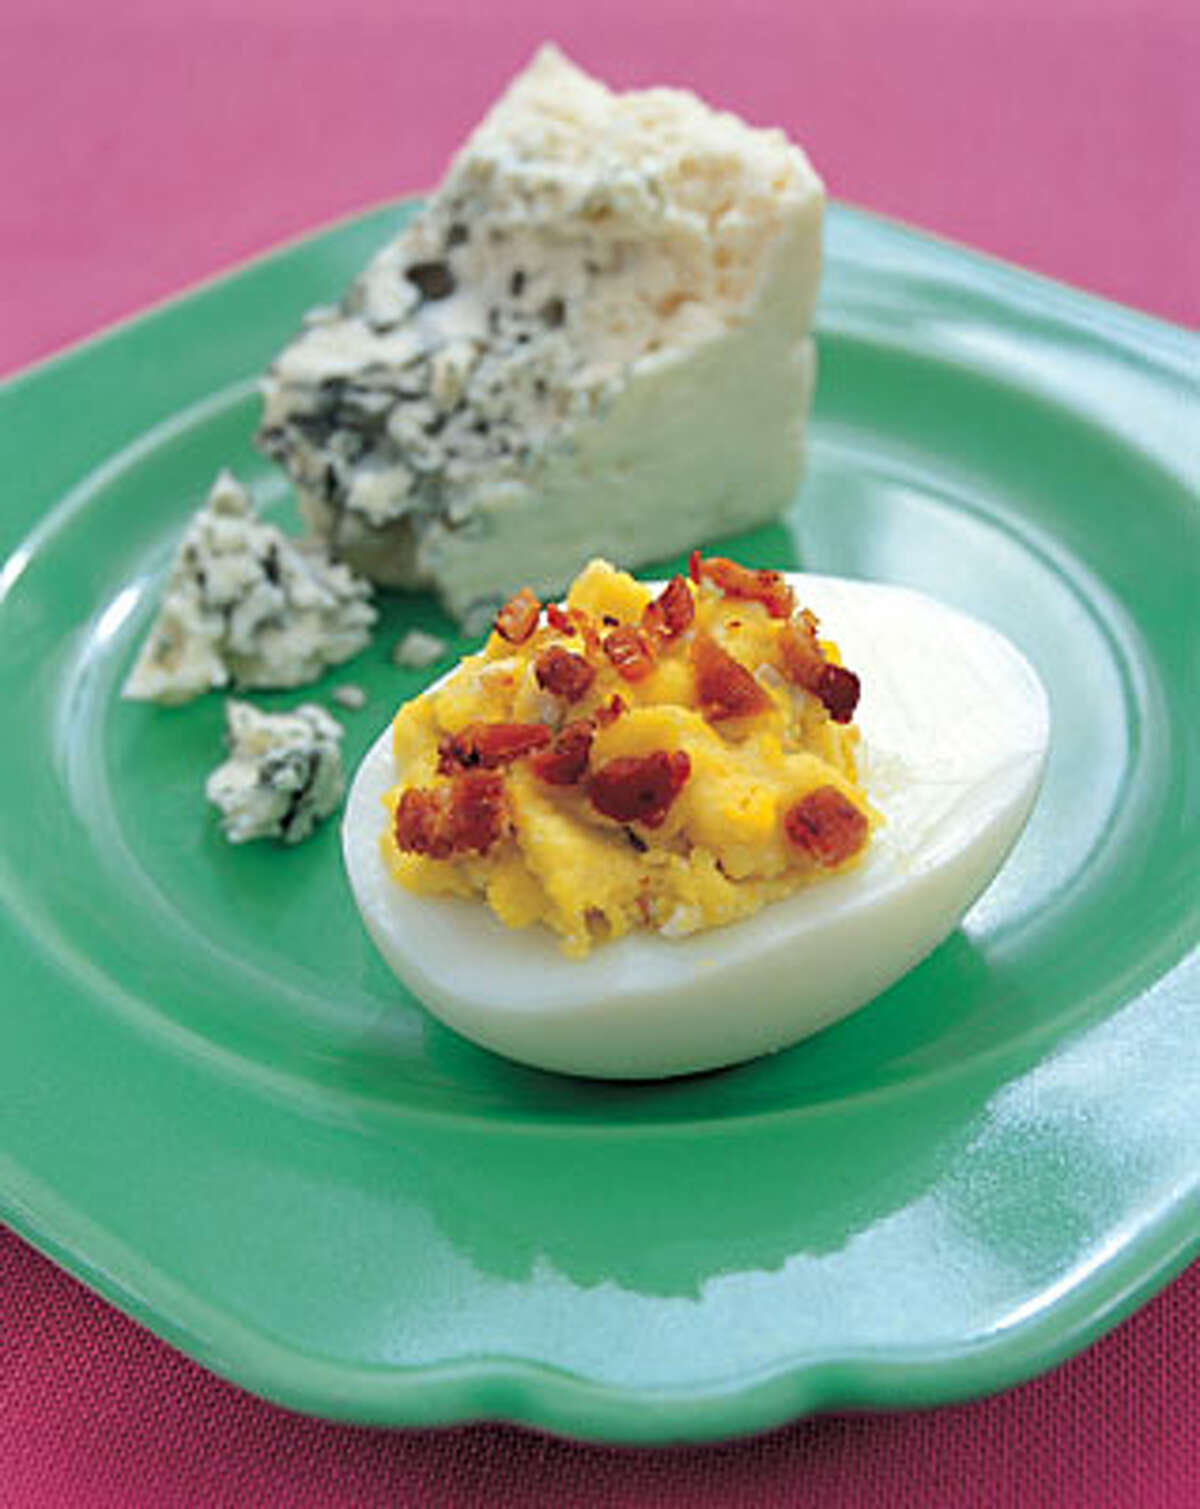 Blue Devils are stuffed eggs from Debbie Moose, author of "Deviled Eggs: 50 Recipes from Simple to Sassy"